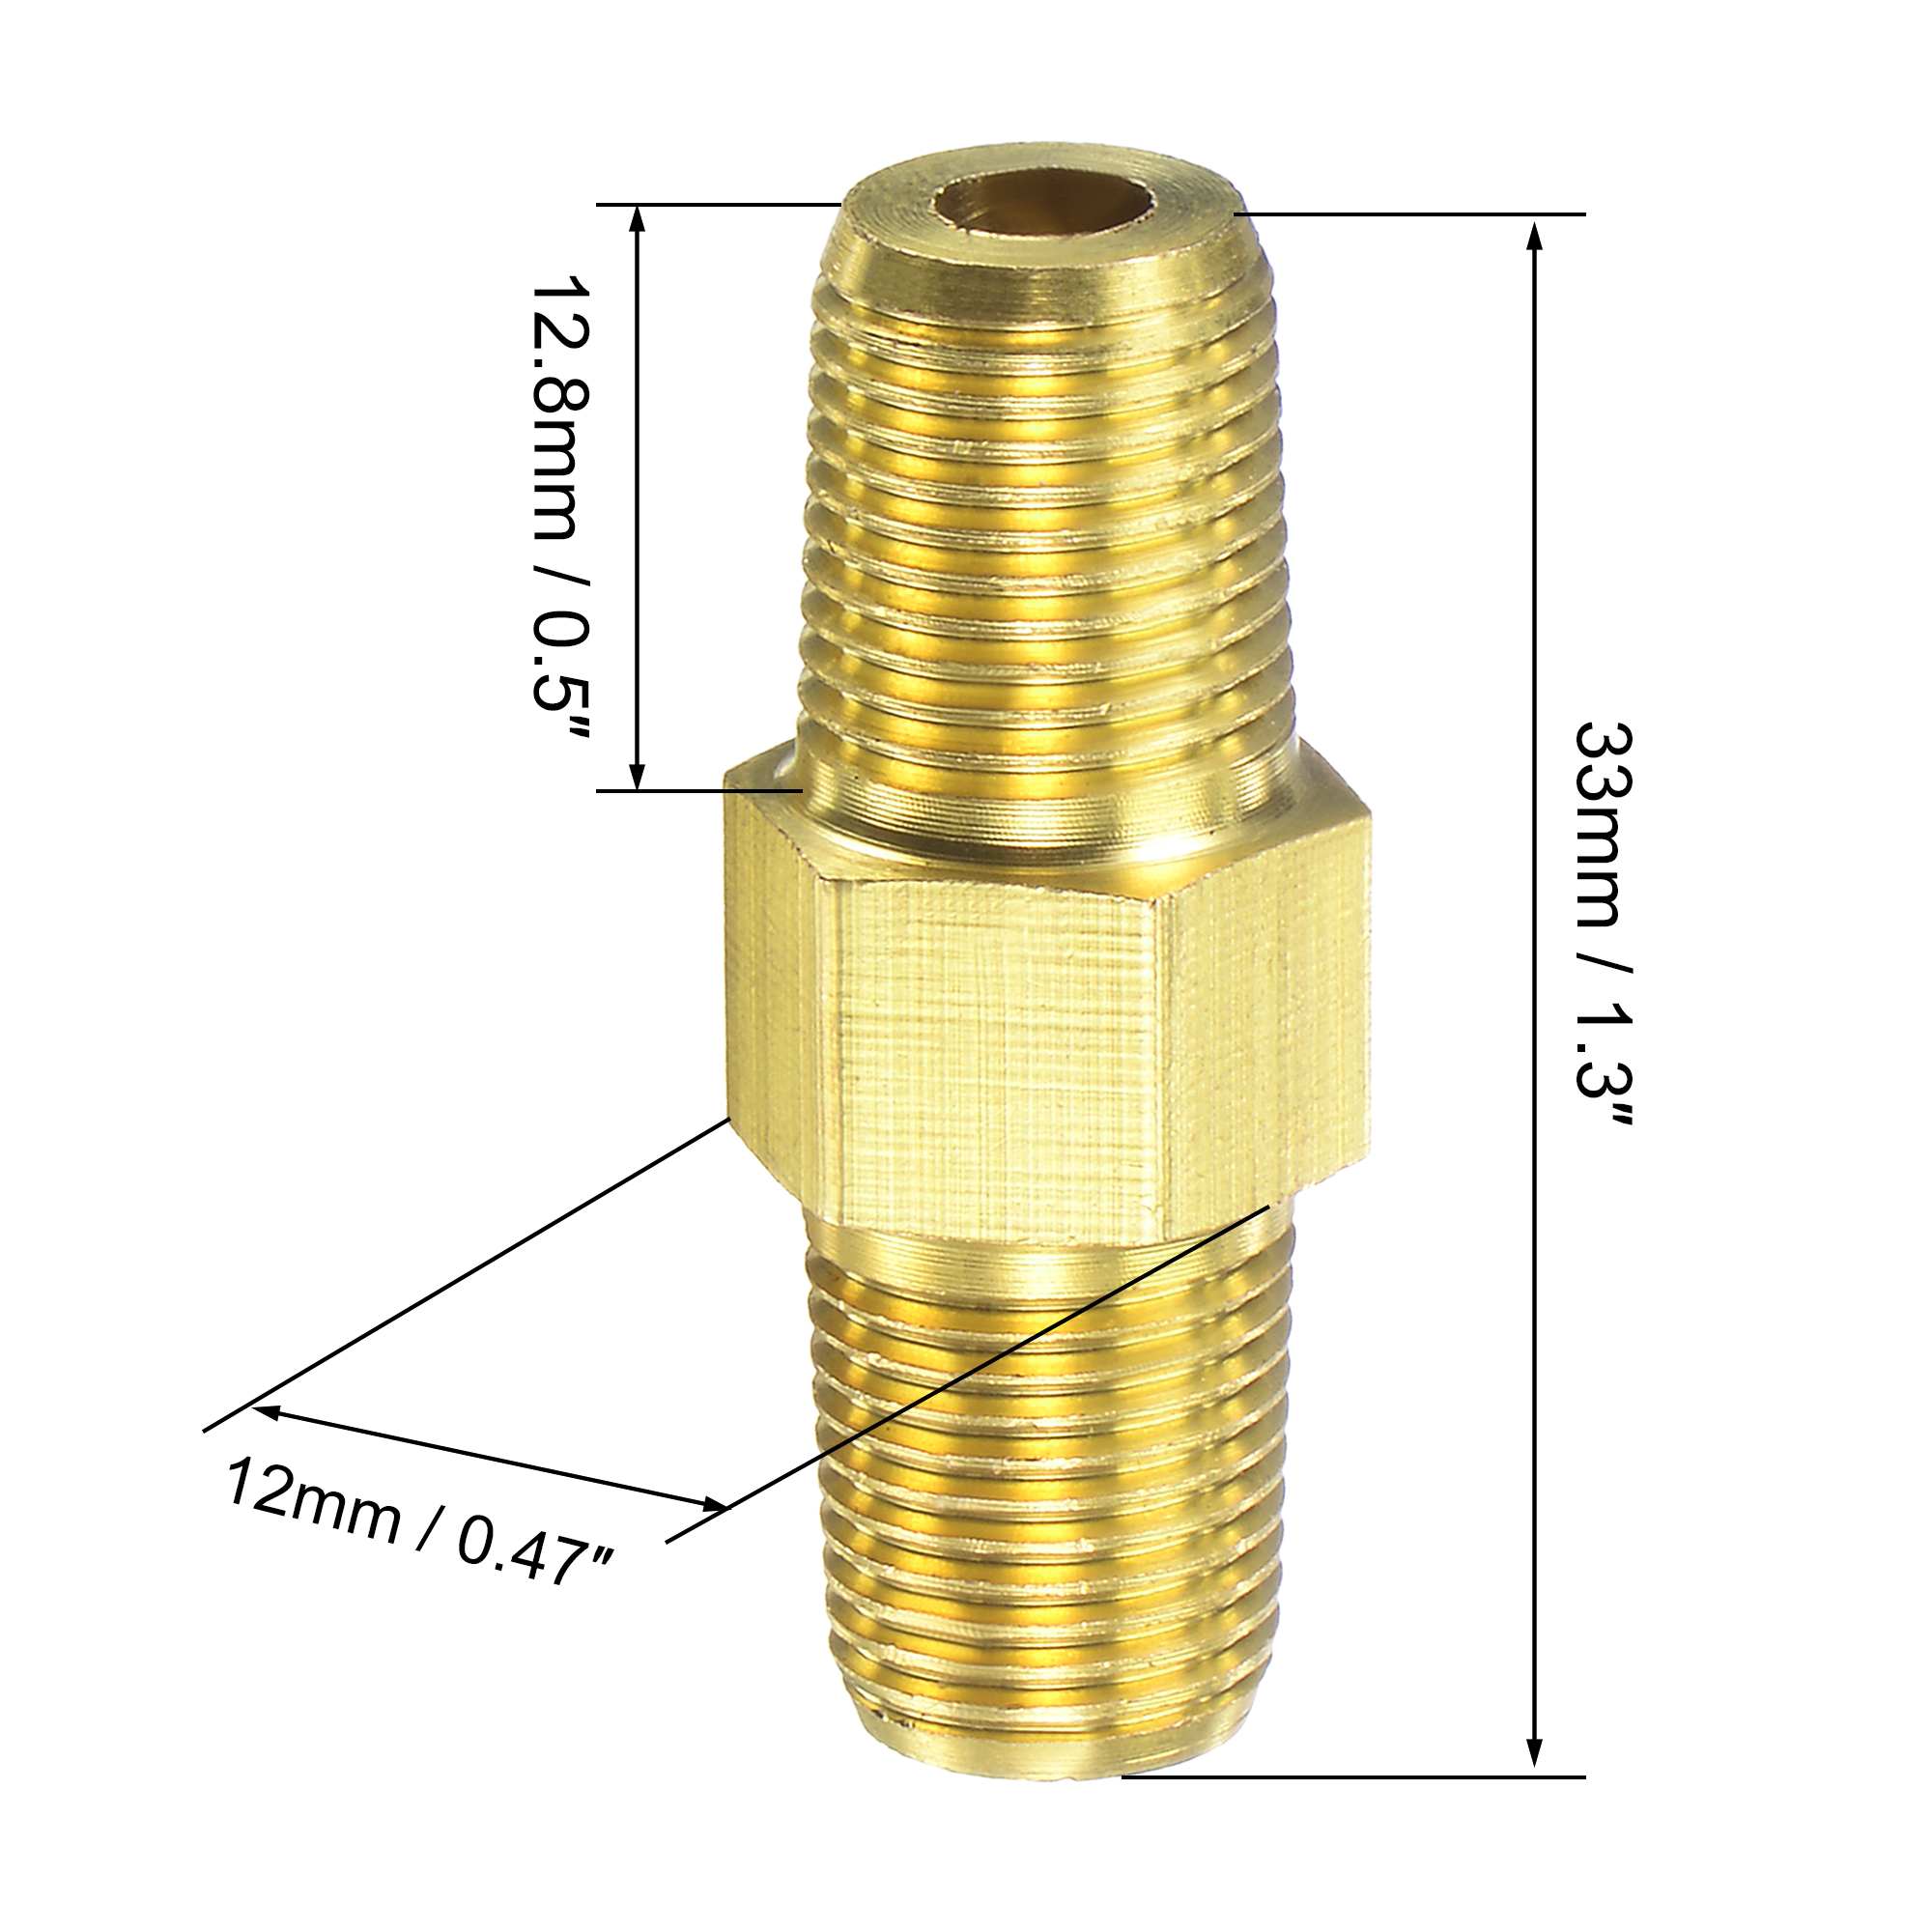 Unique Bargains Brass Pipe Fitting Reducer Adapter 1/8" NPT Male x 1/8" NPT Male